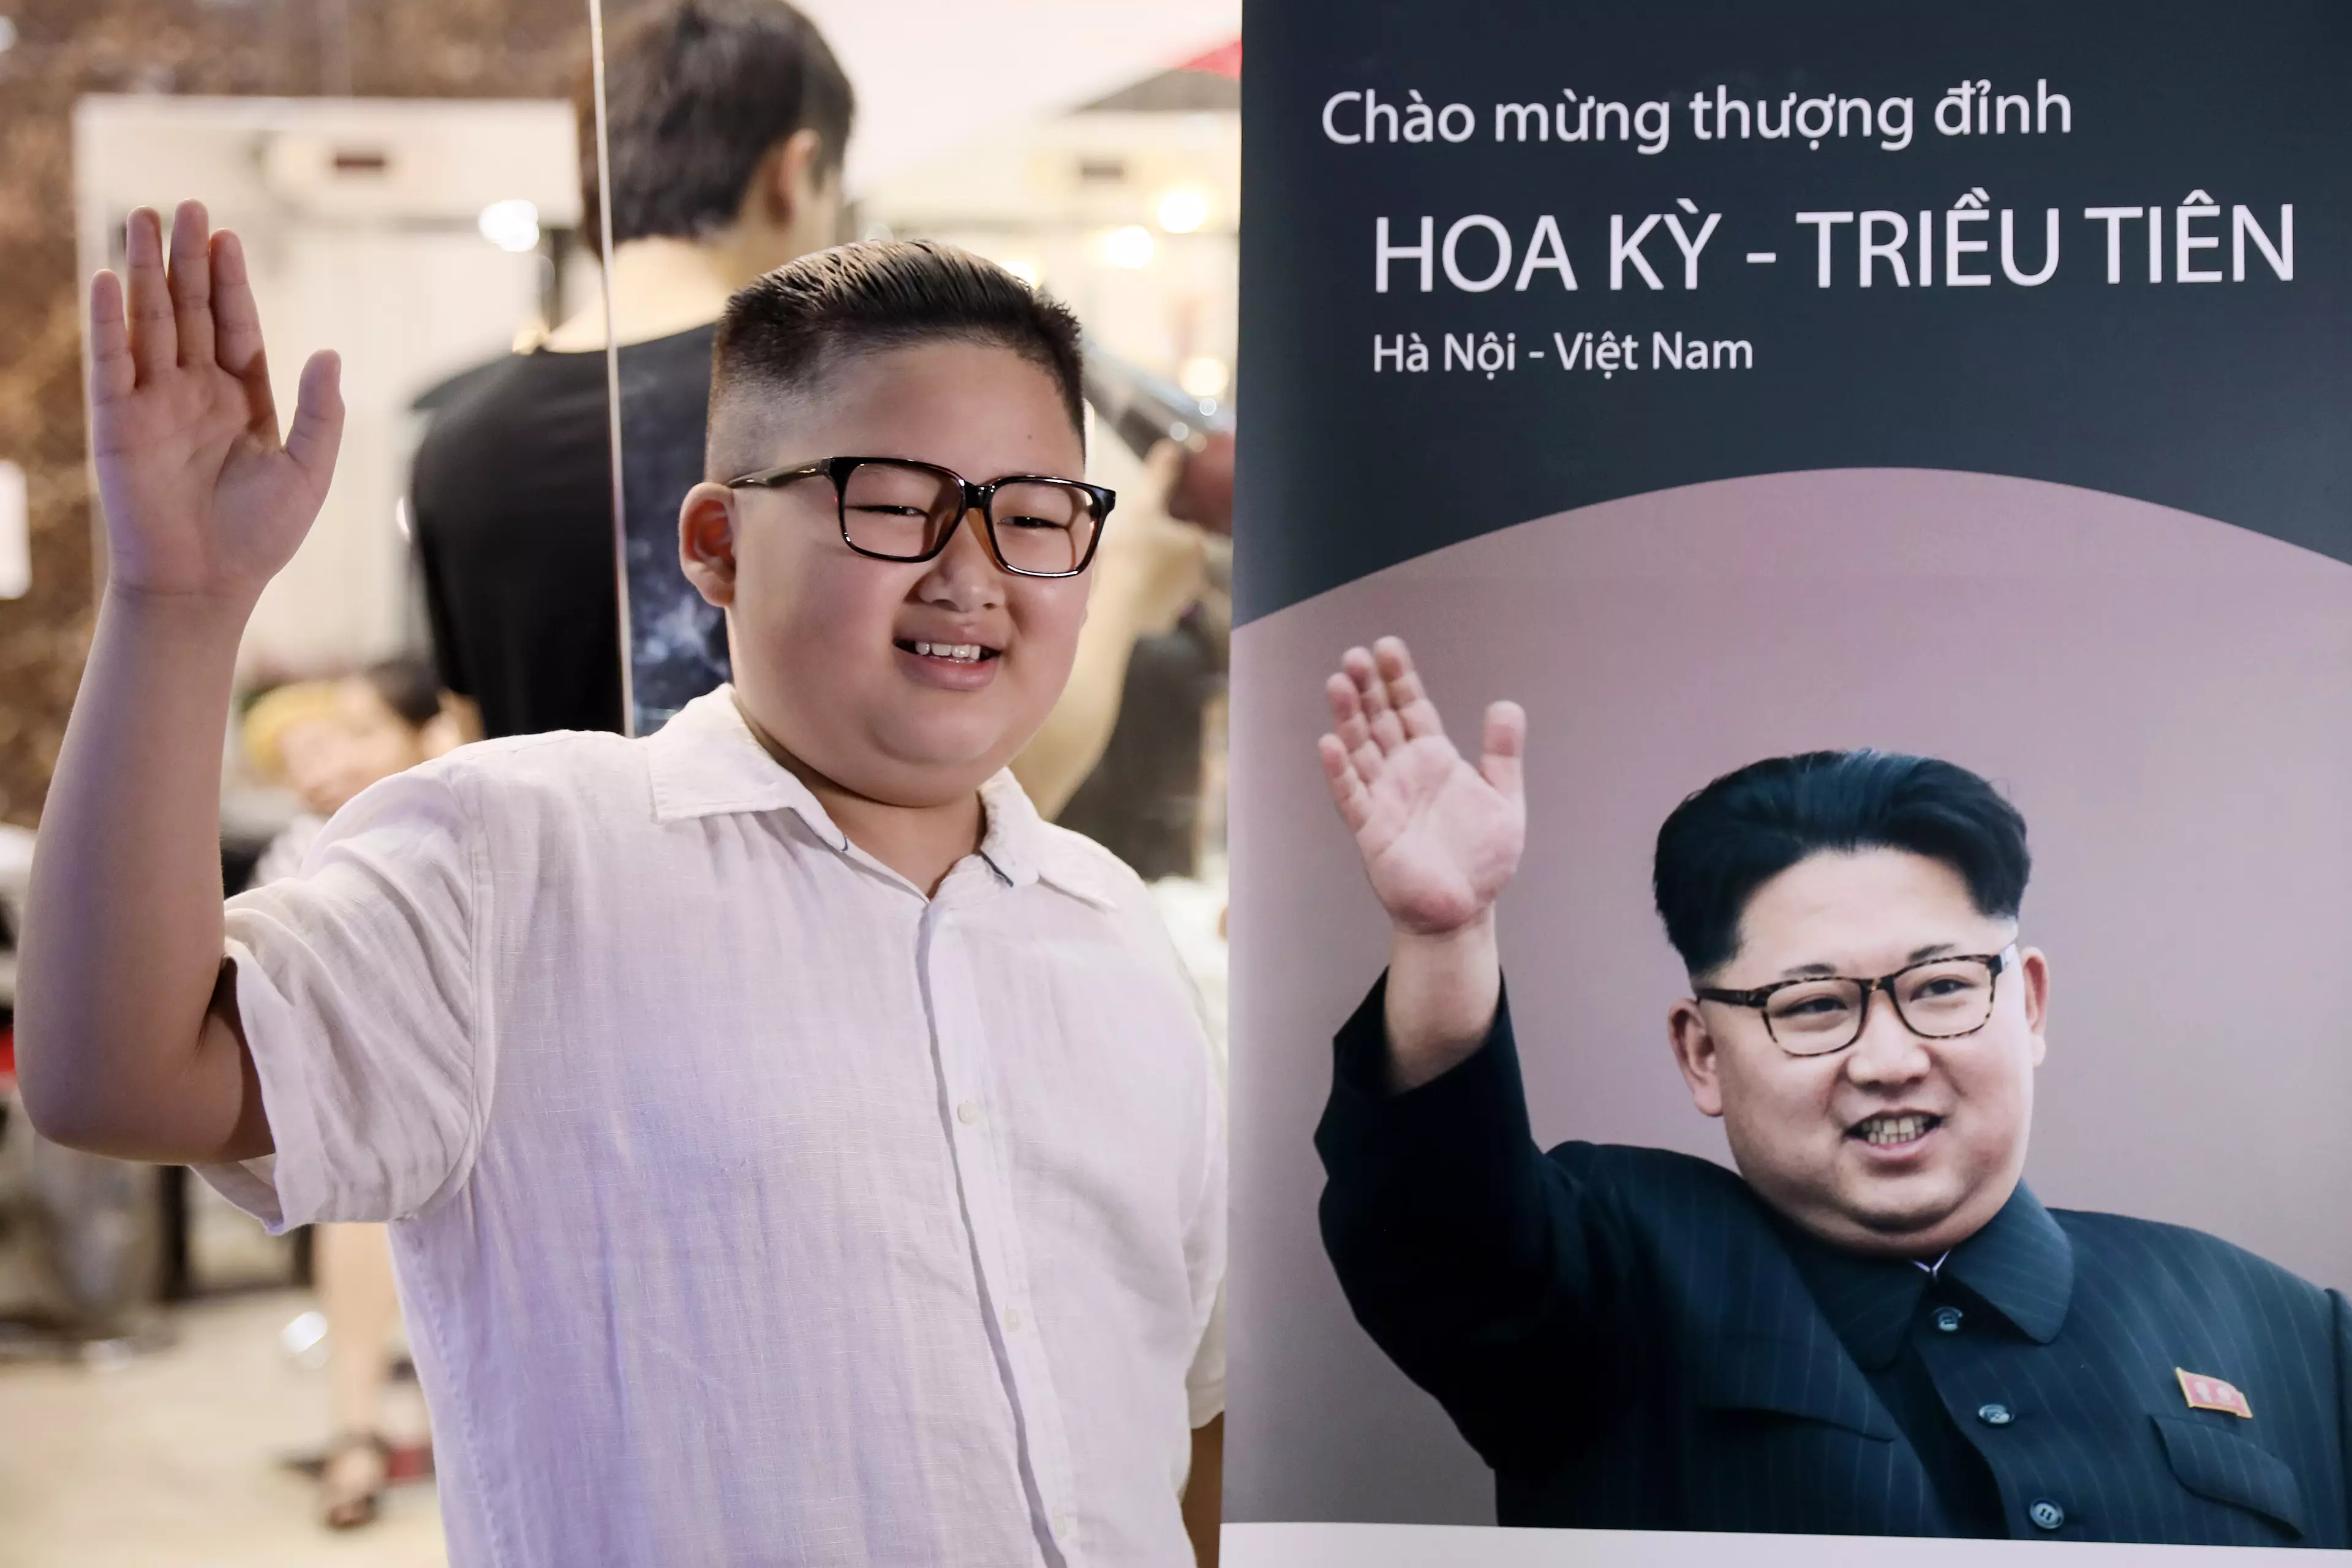 To Gia Huy said he often gets told he looks like the North Korean leader.